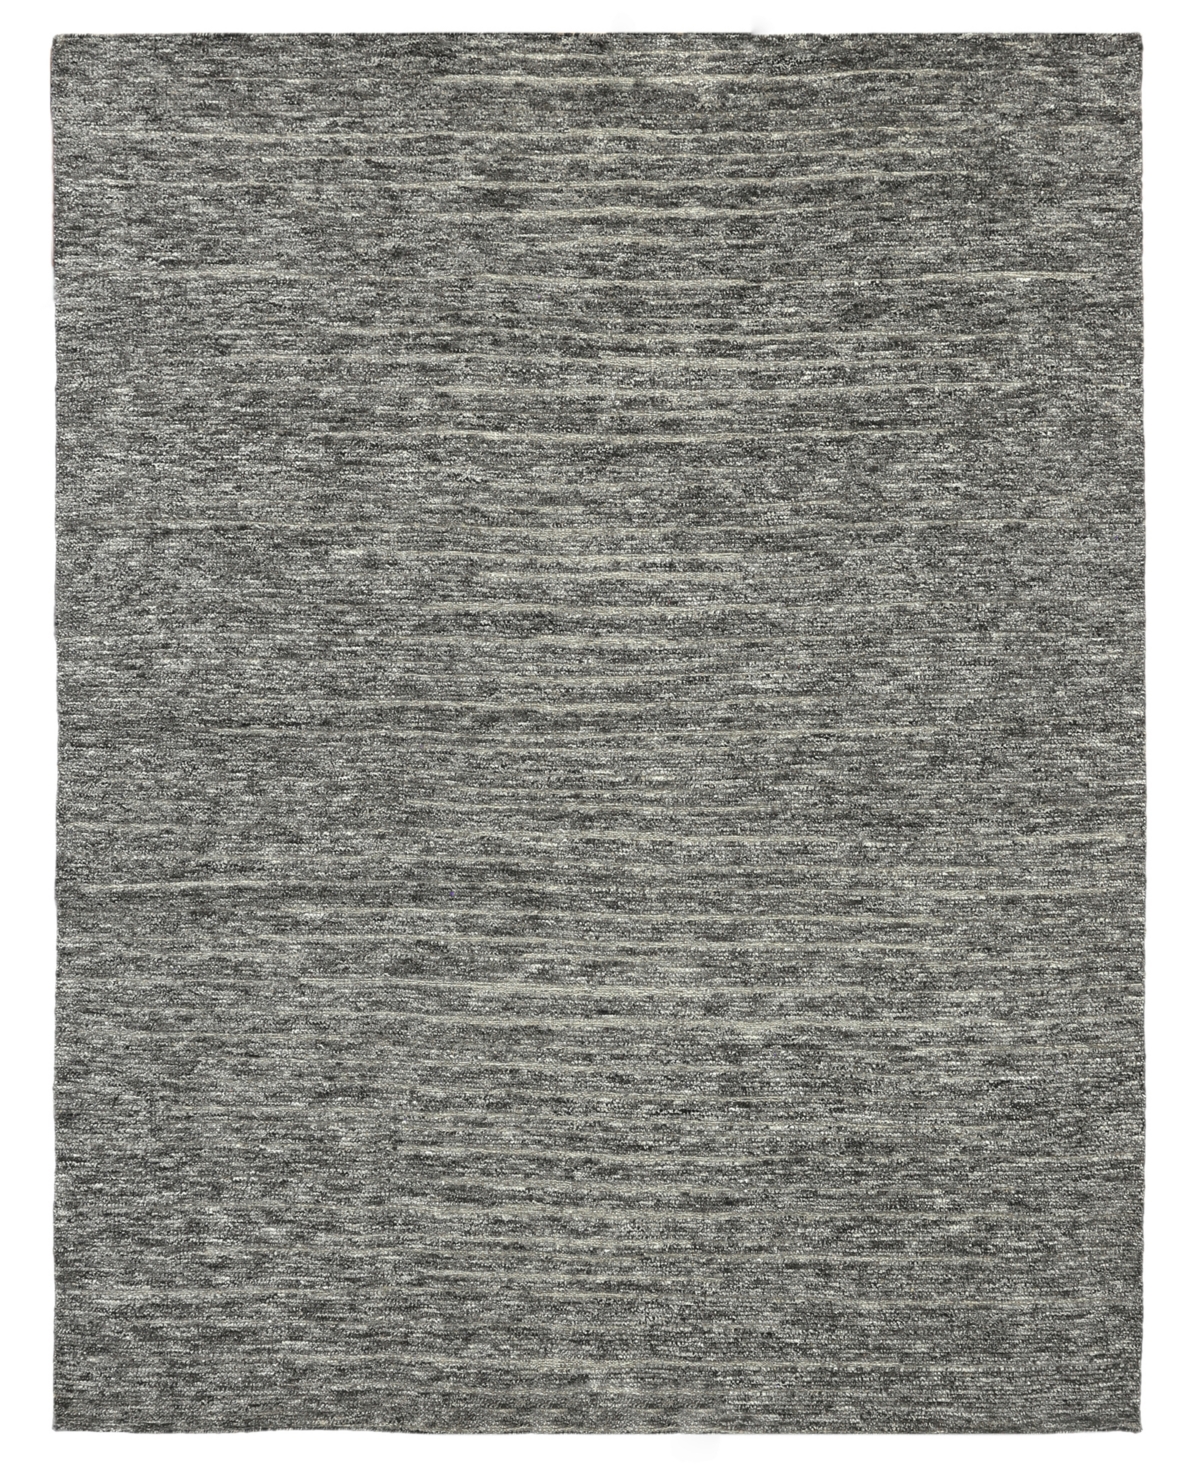 Exquisite Rugs Eaton Er4041 8' X 10' Area Rug In Charcoal